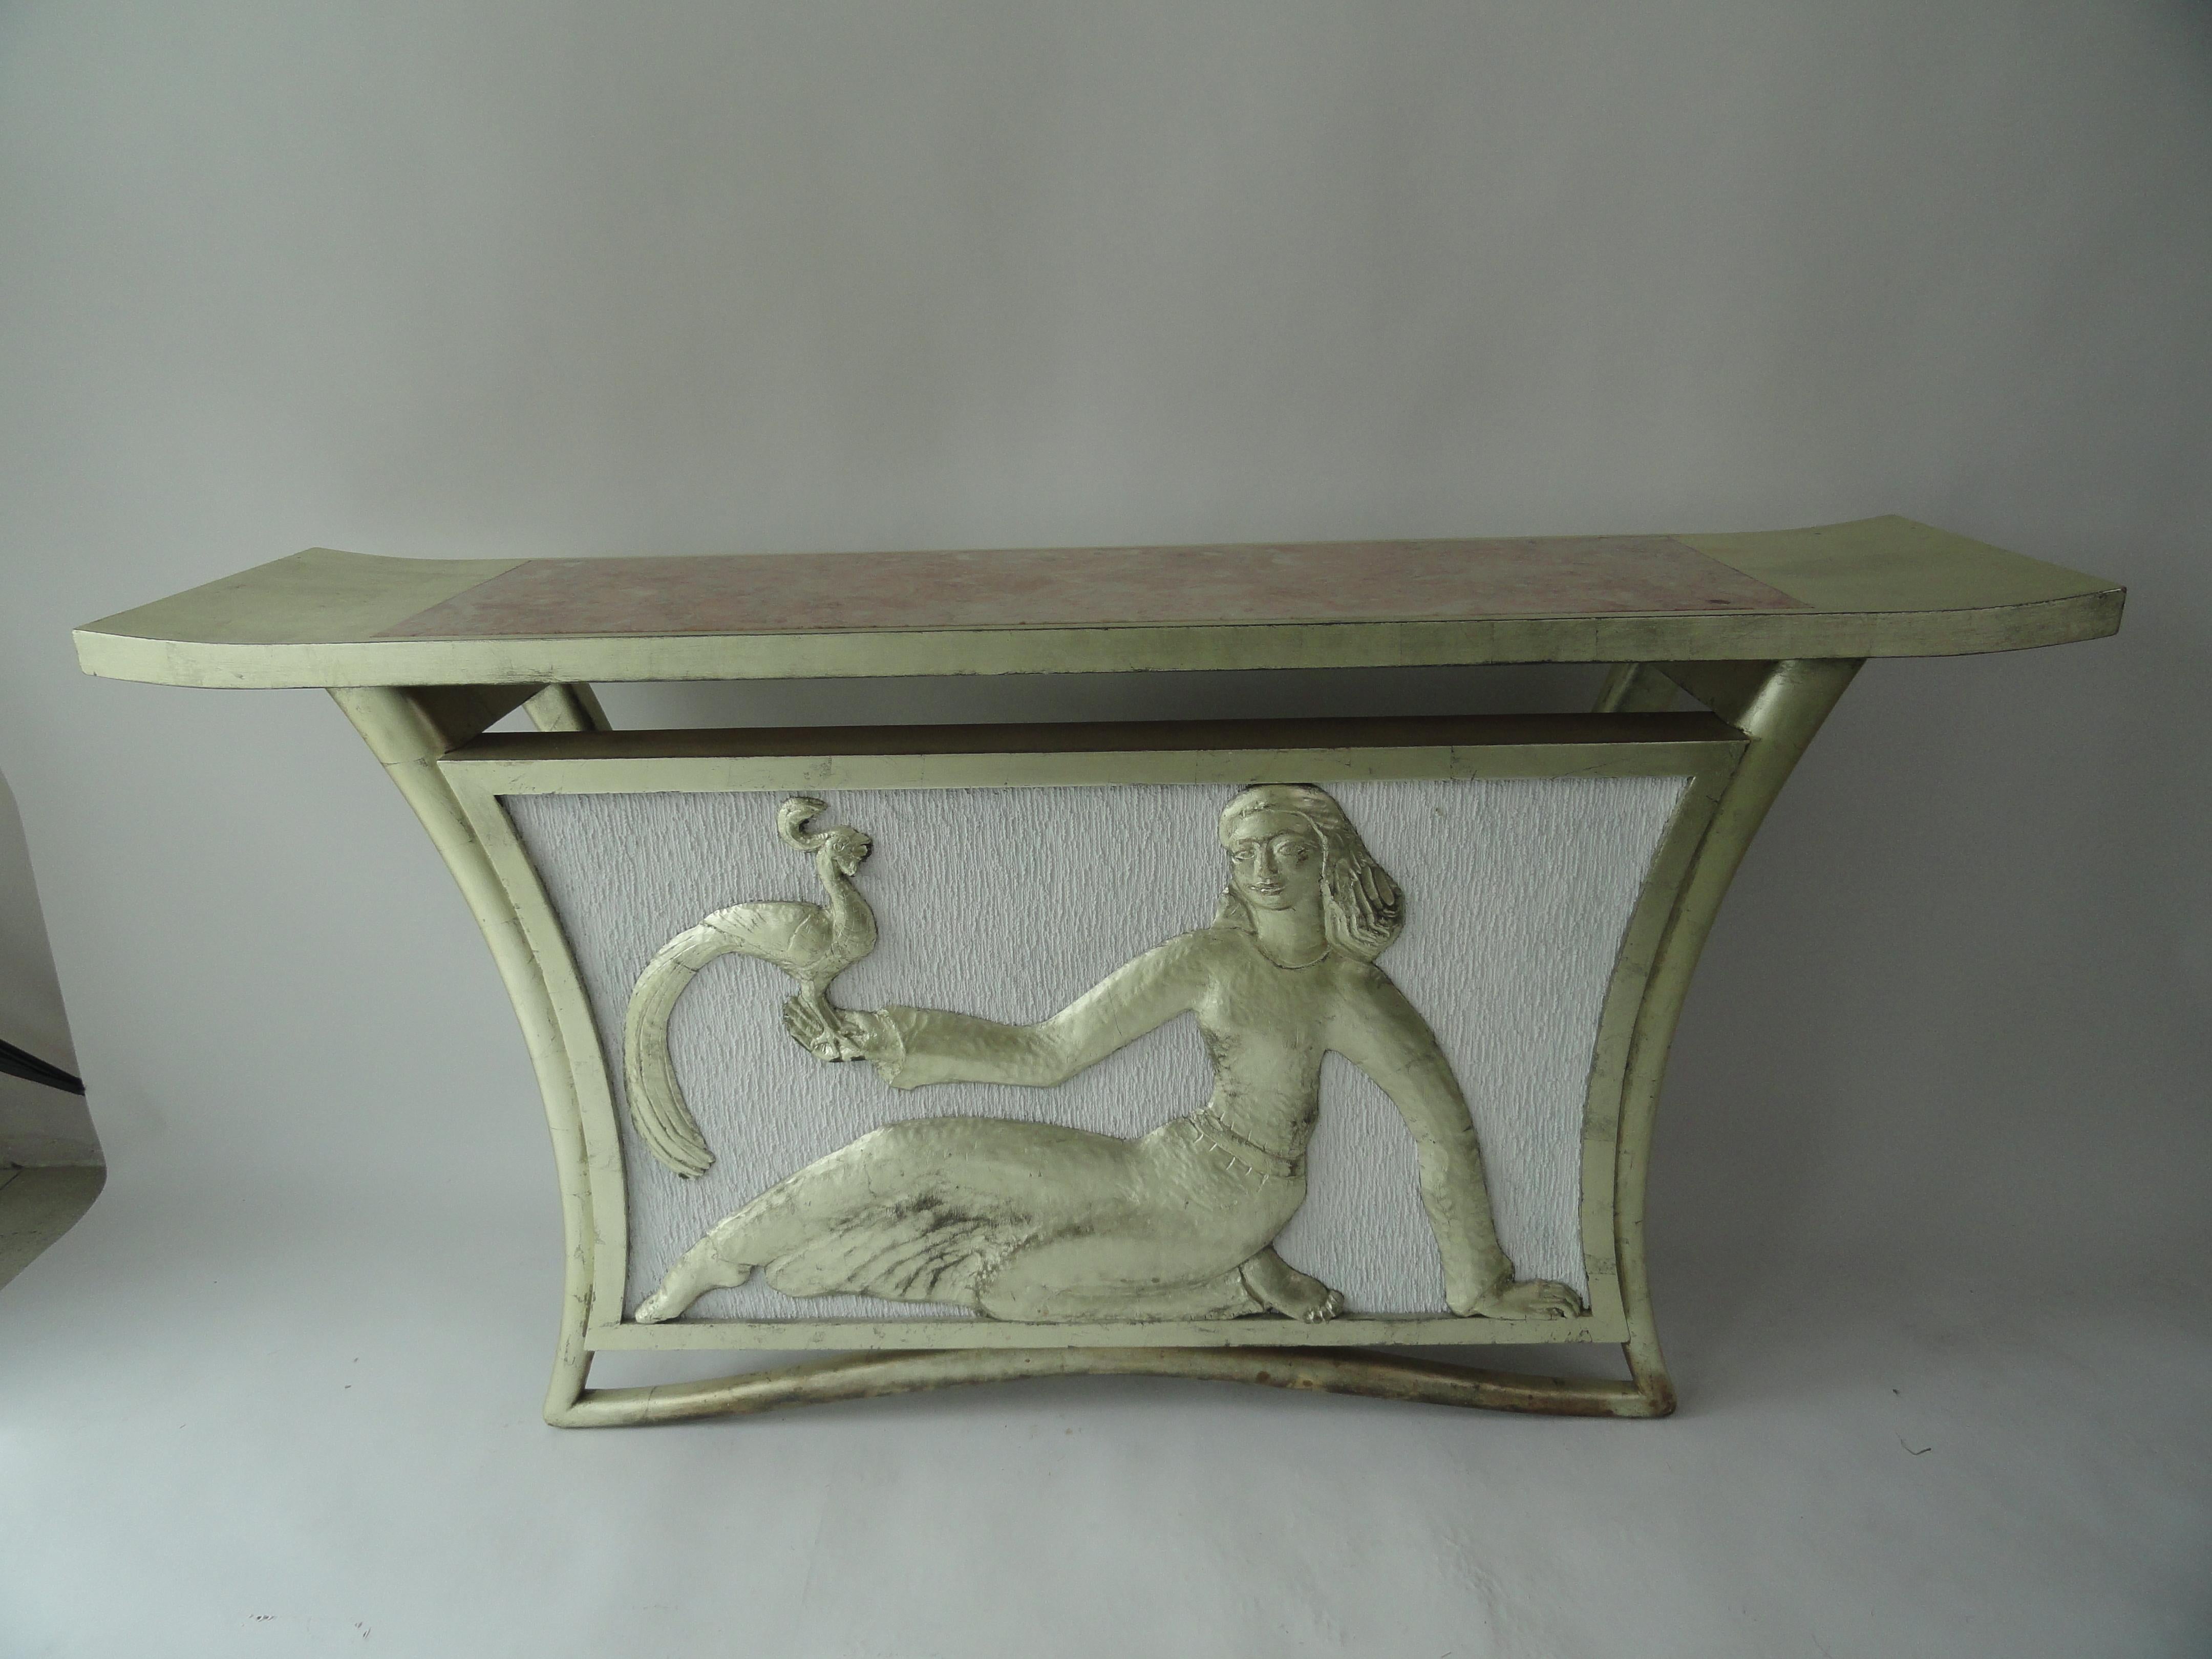 Custom T.H. Robsjohn-Gibbings table with marble insert on top. Carved female figure, Lydia, with peacock. Newer silver leaf finish on frame. White painted fabric background.
Table came from a Palm Beach estate.